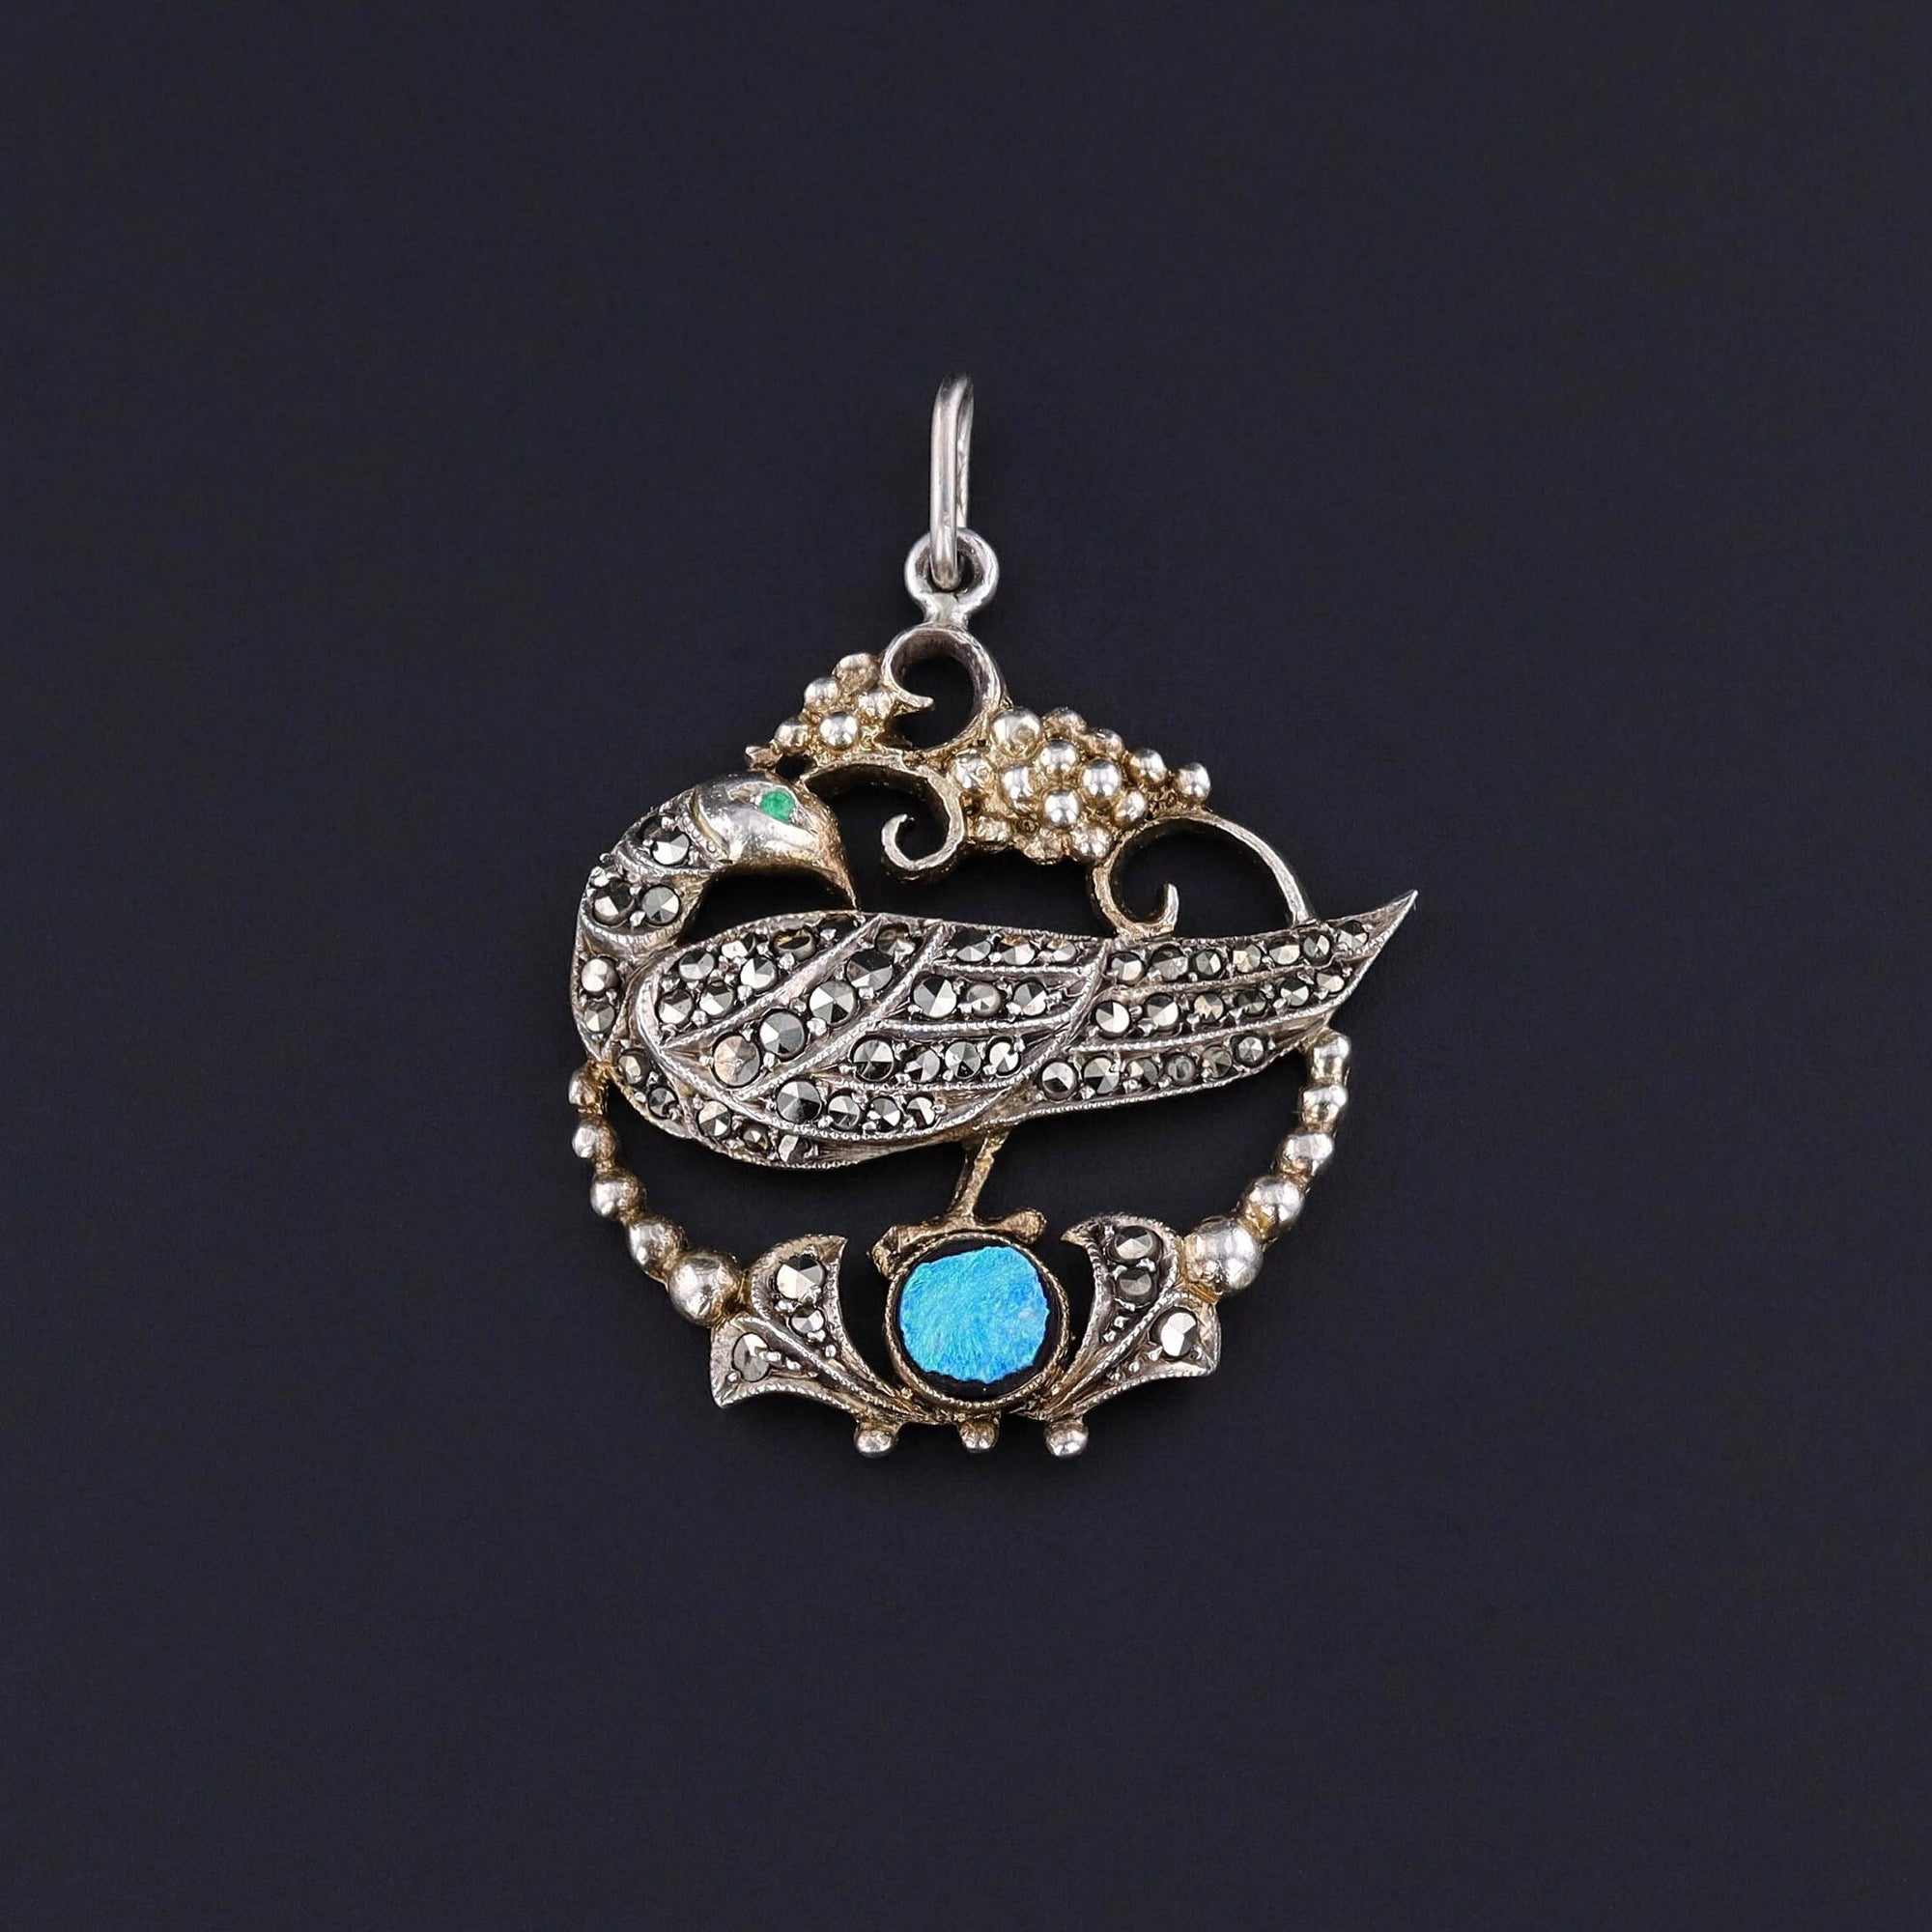 Antique Peacock Pendant with Opal and Marcasites